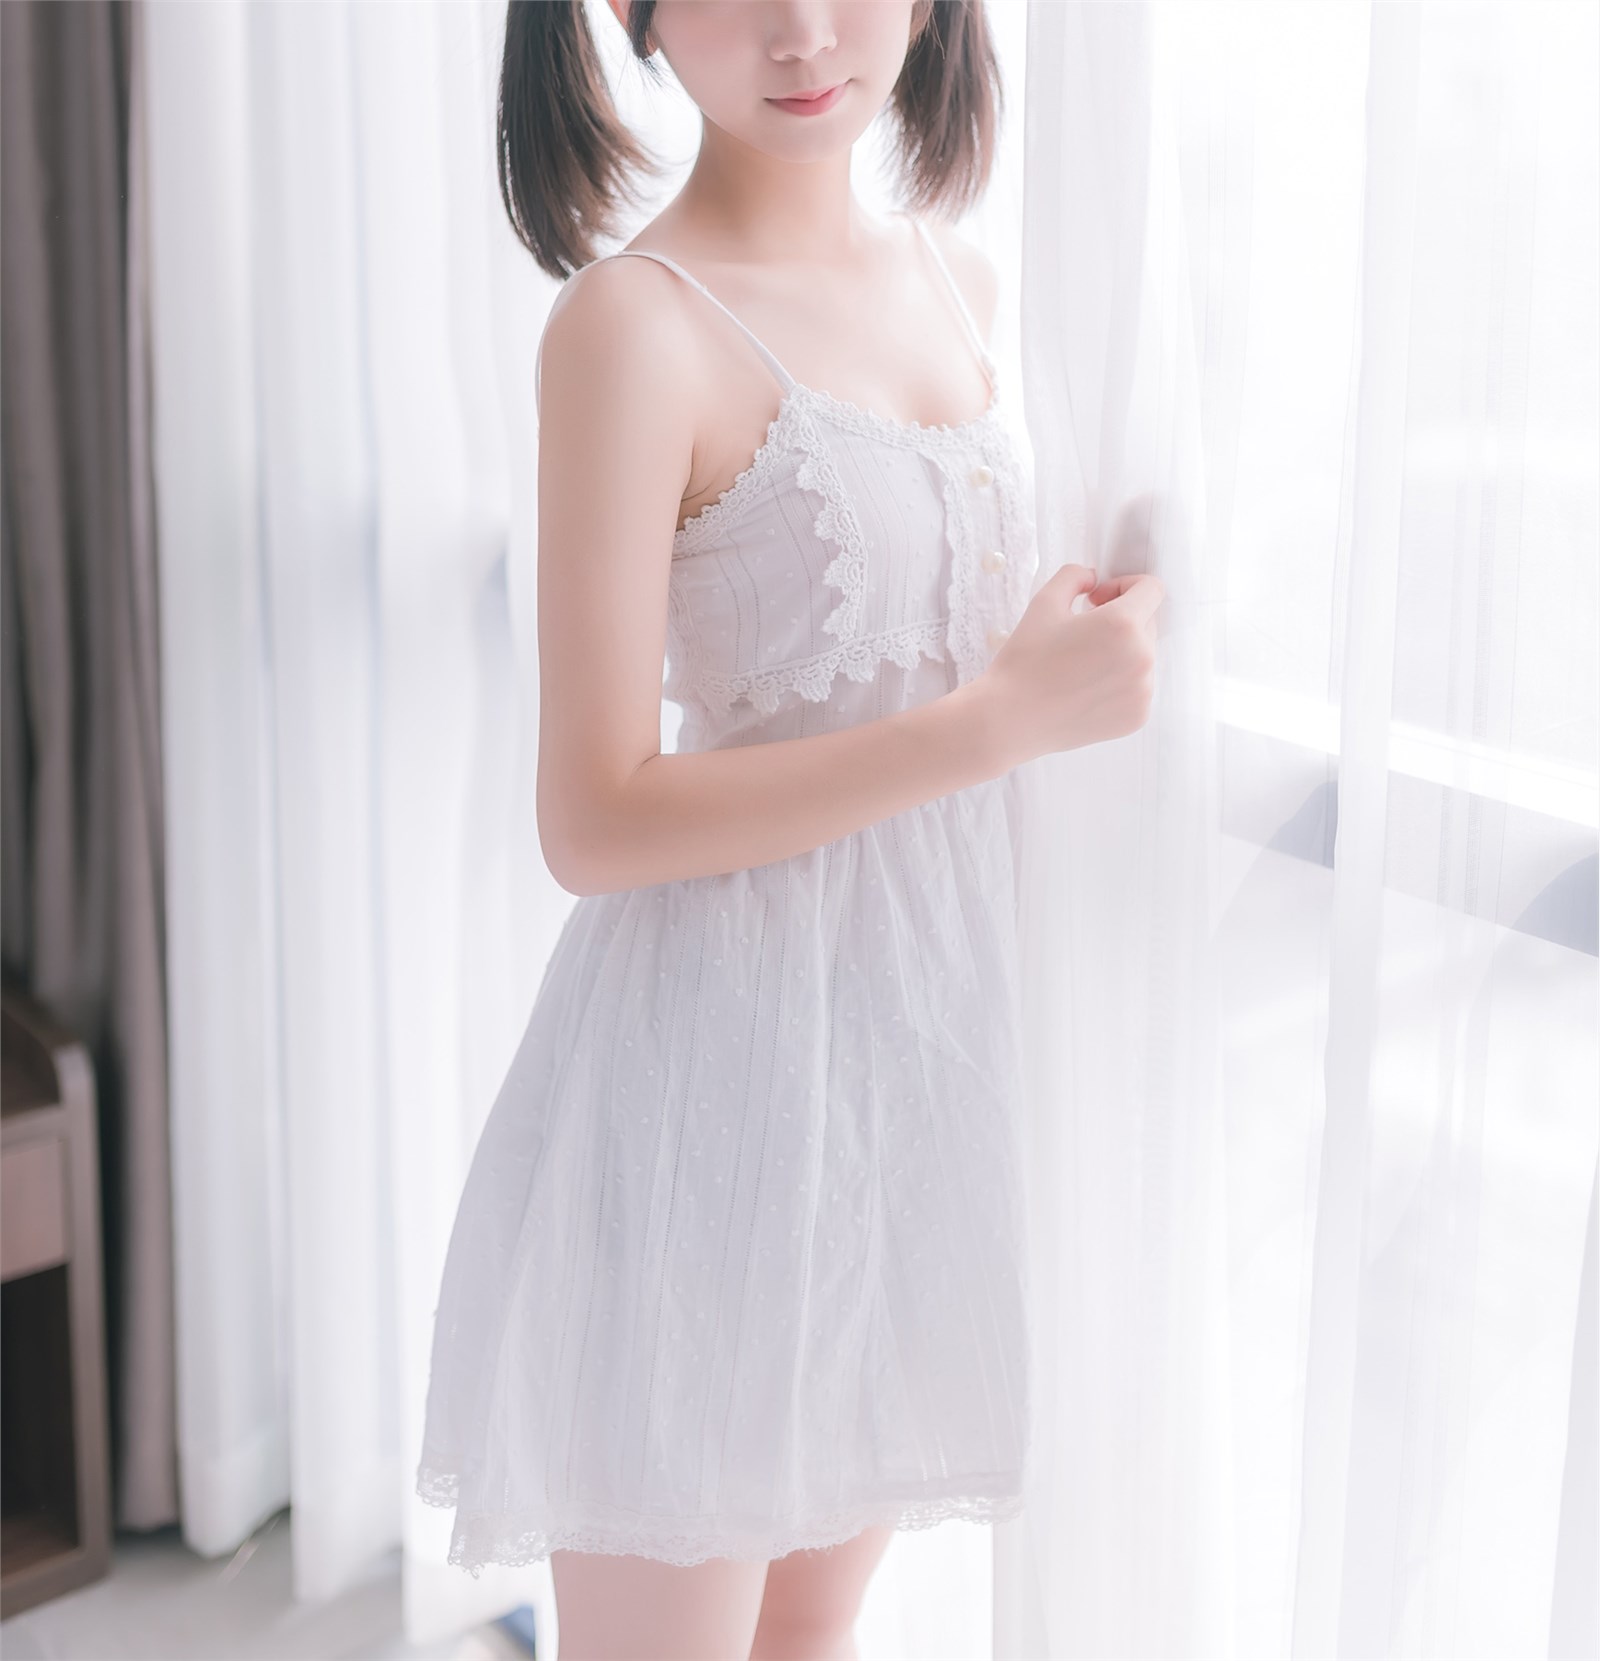 Rabbit play picture white dress double ponytail(11)